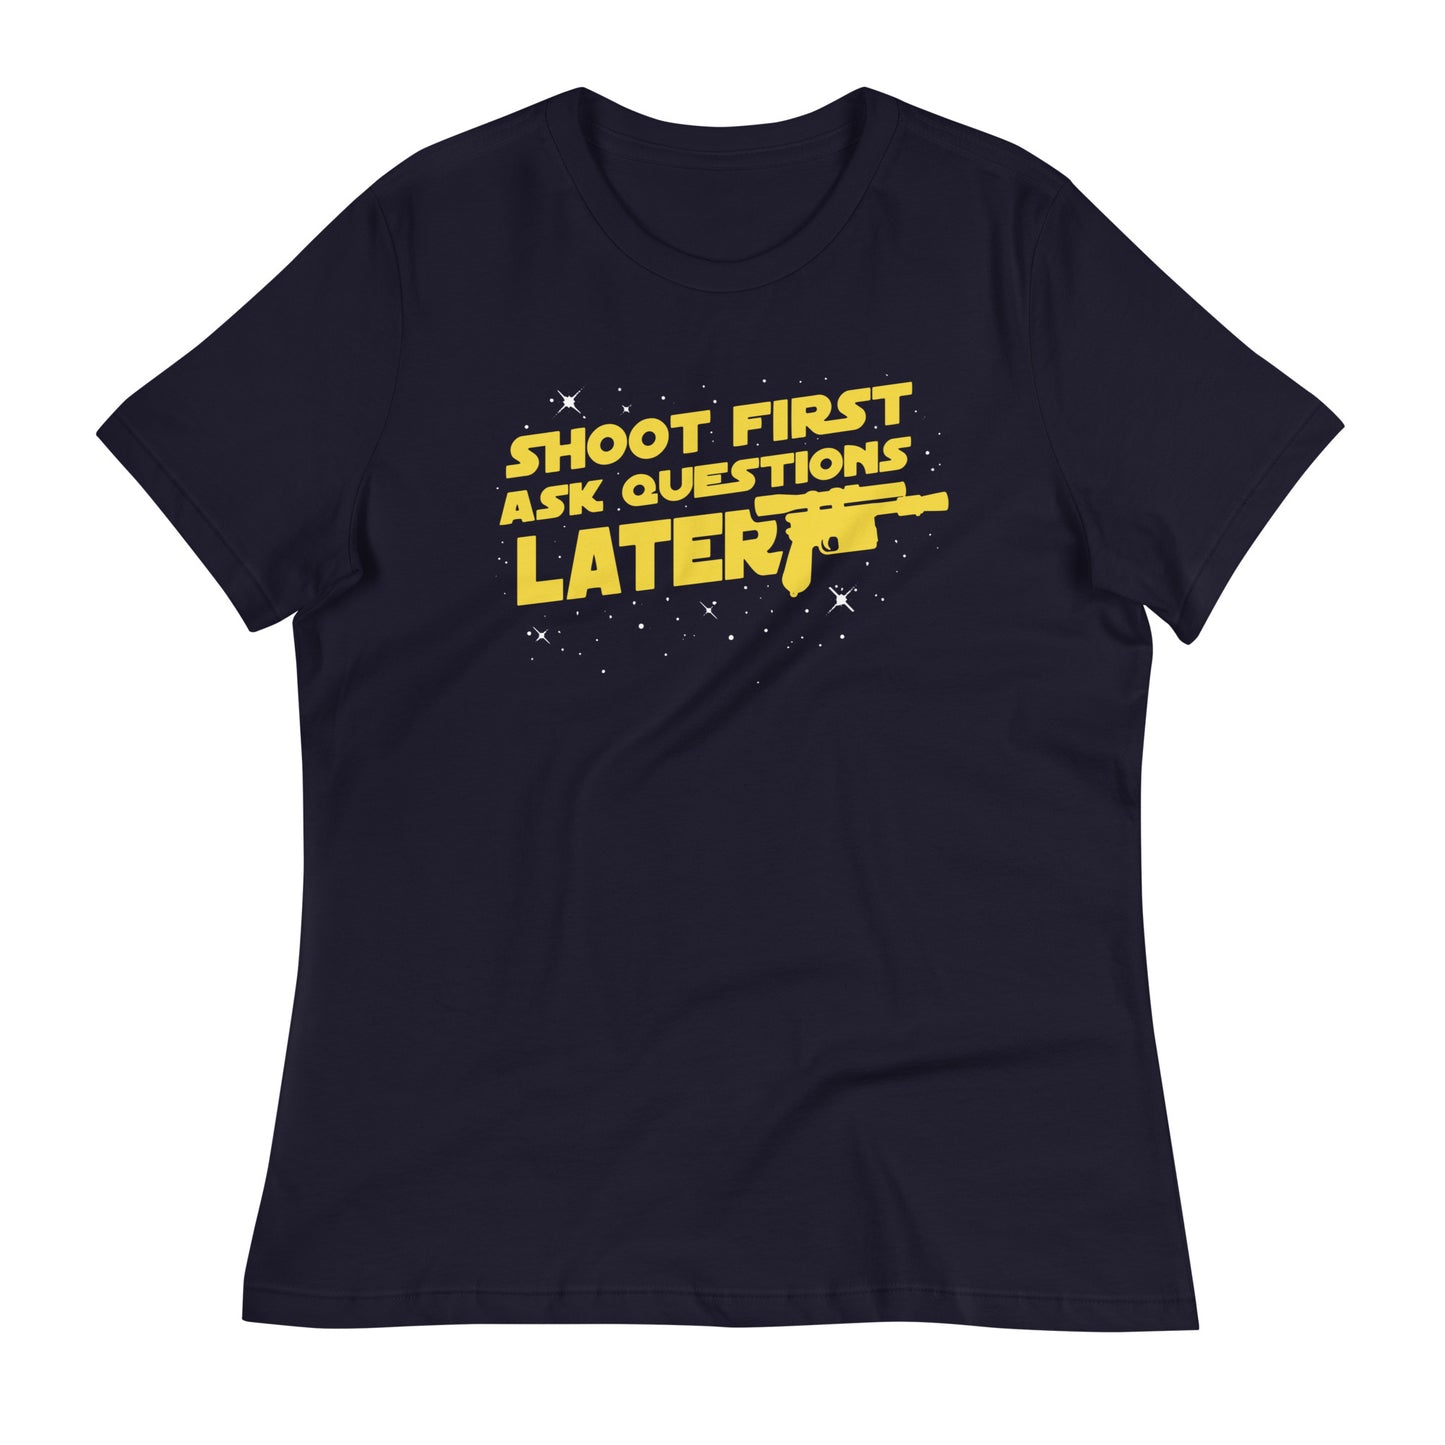 Shoot First Ask Questions Later Women's Signature Tee